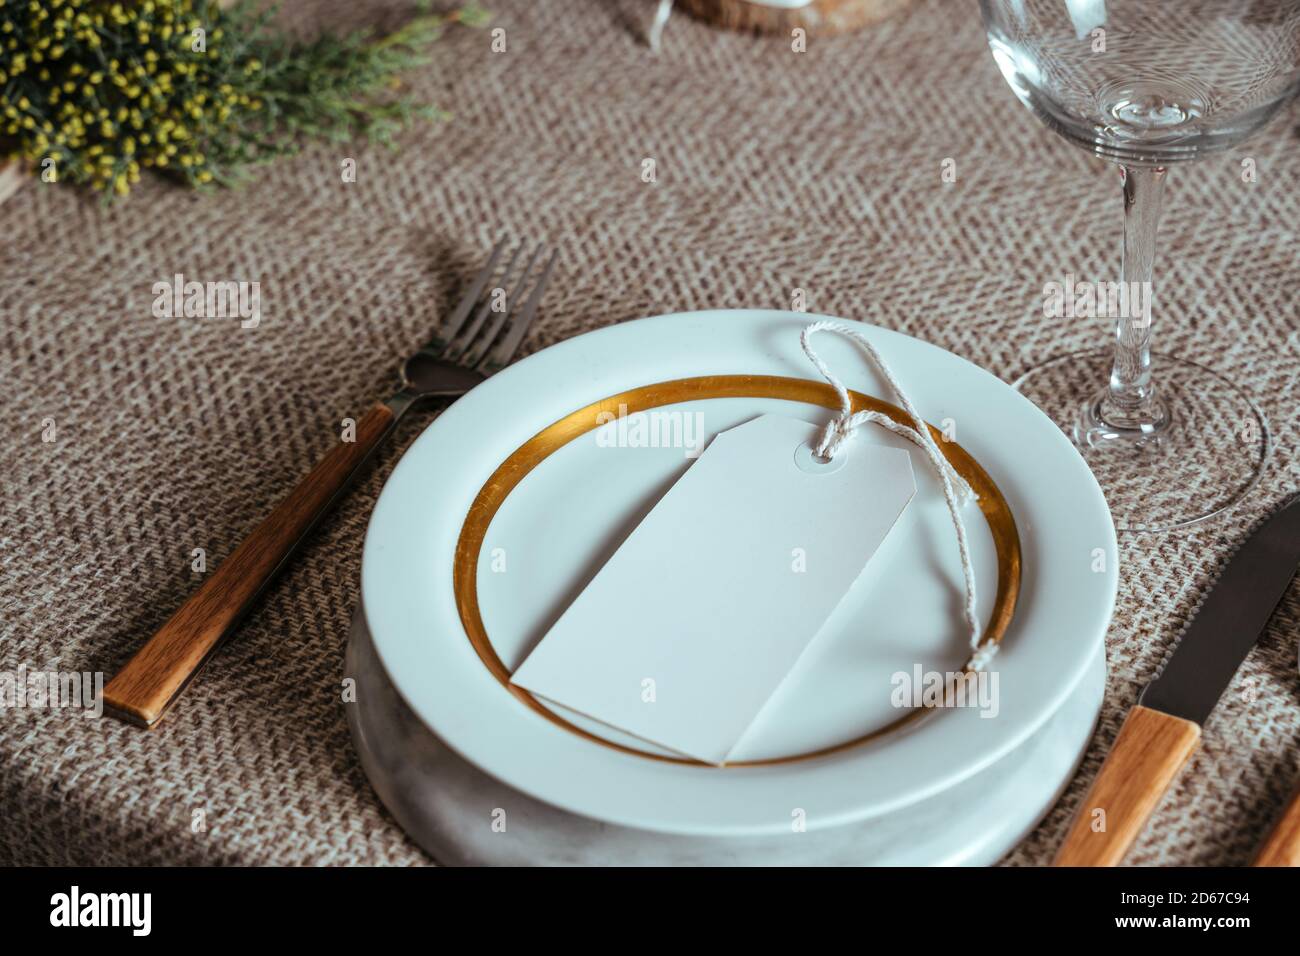 https://c8.alamy.com/comp/2D67C94/holiday-gold-place-setting-christmas-table-menu-with-empty-card-ornaments-and-natural-pine-branch-on-rustic-beige-mantel-dinner-at-home-2D67C94.jpg